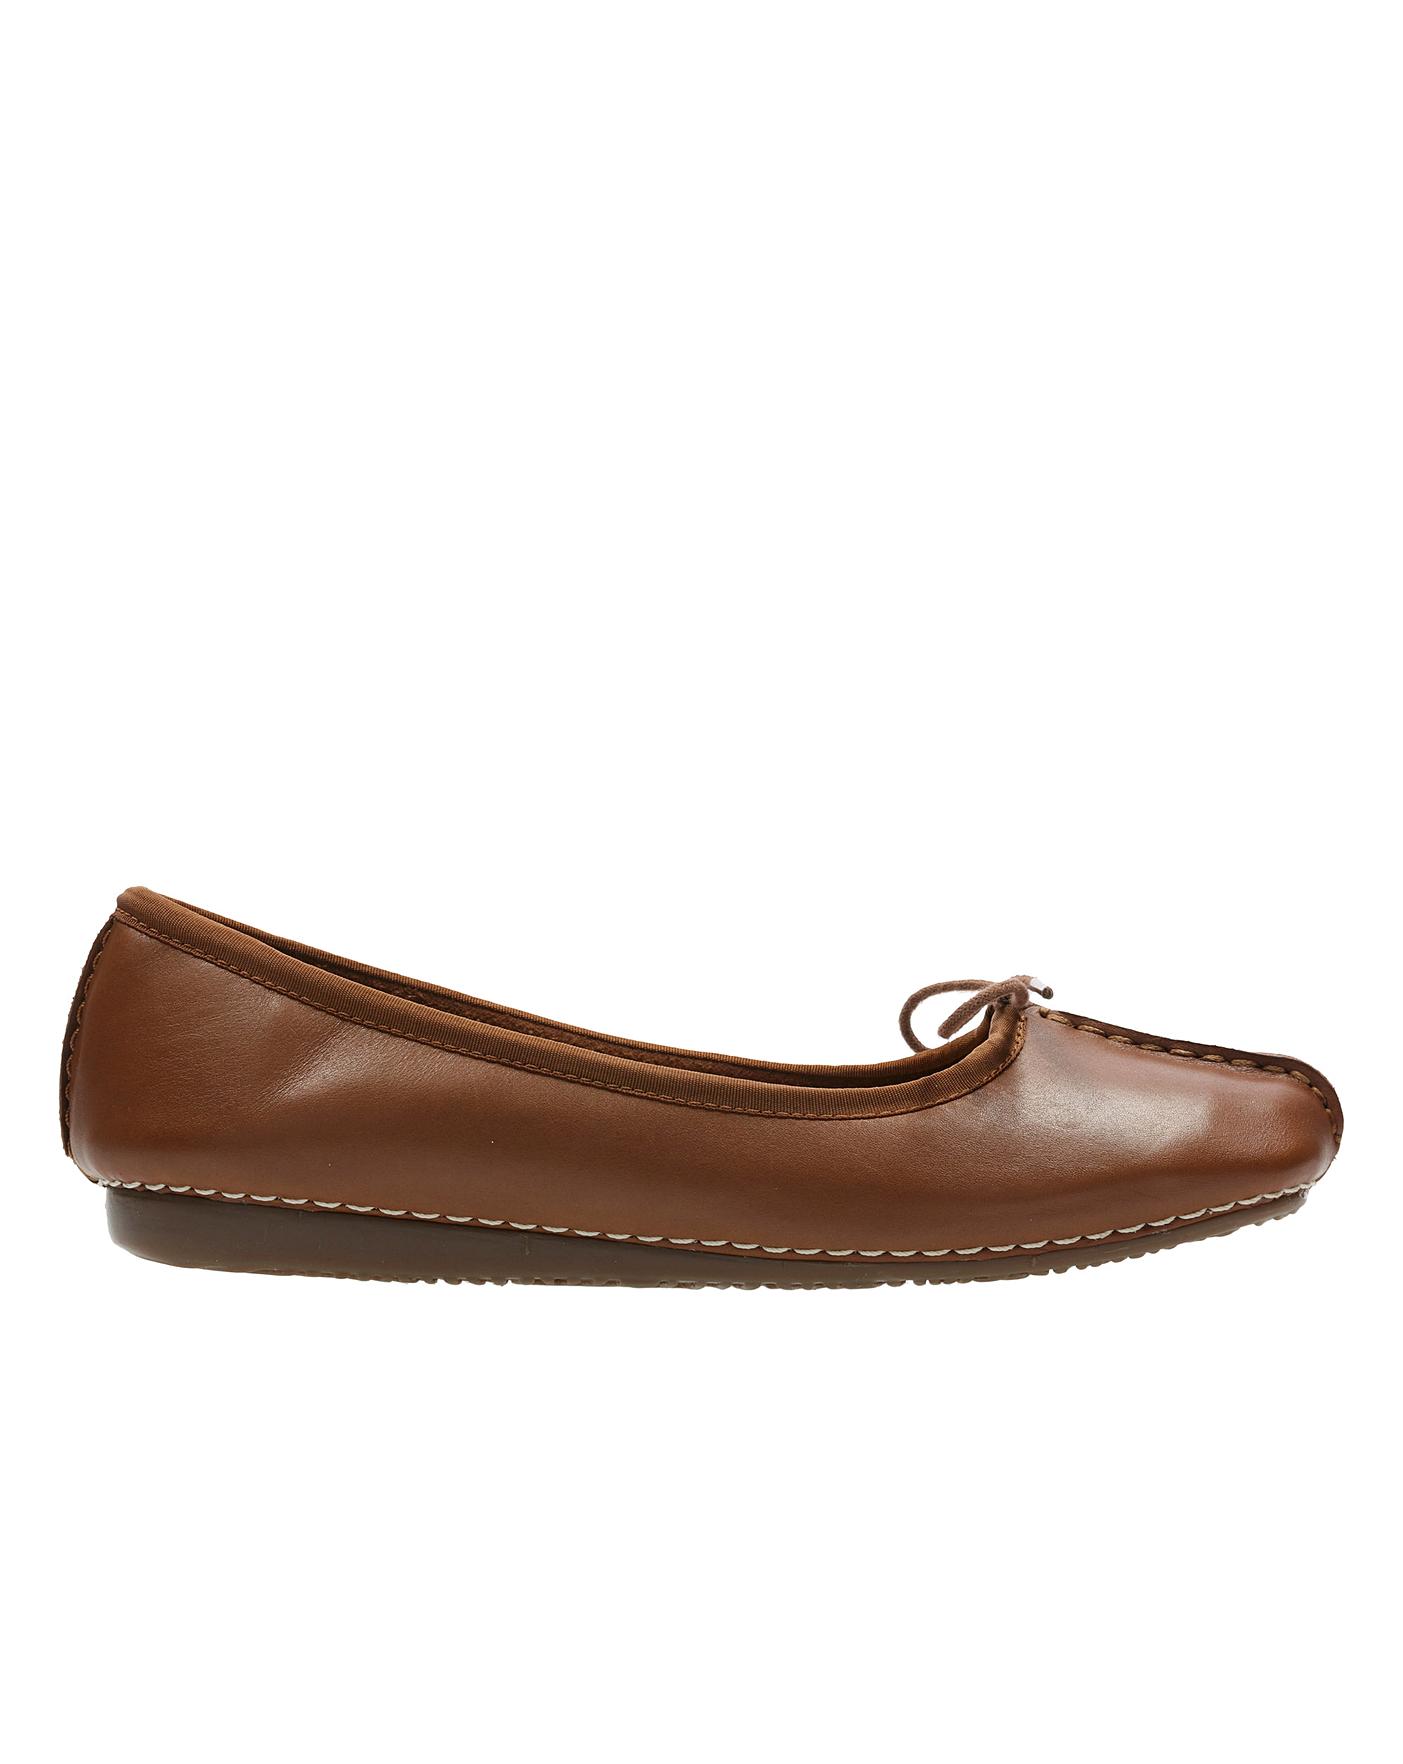 Ladies Clarks Freckle Ice Leather 